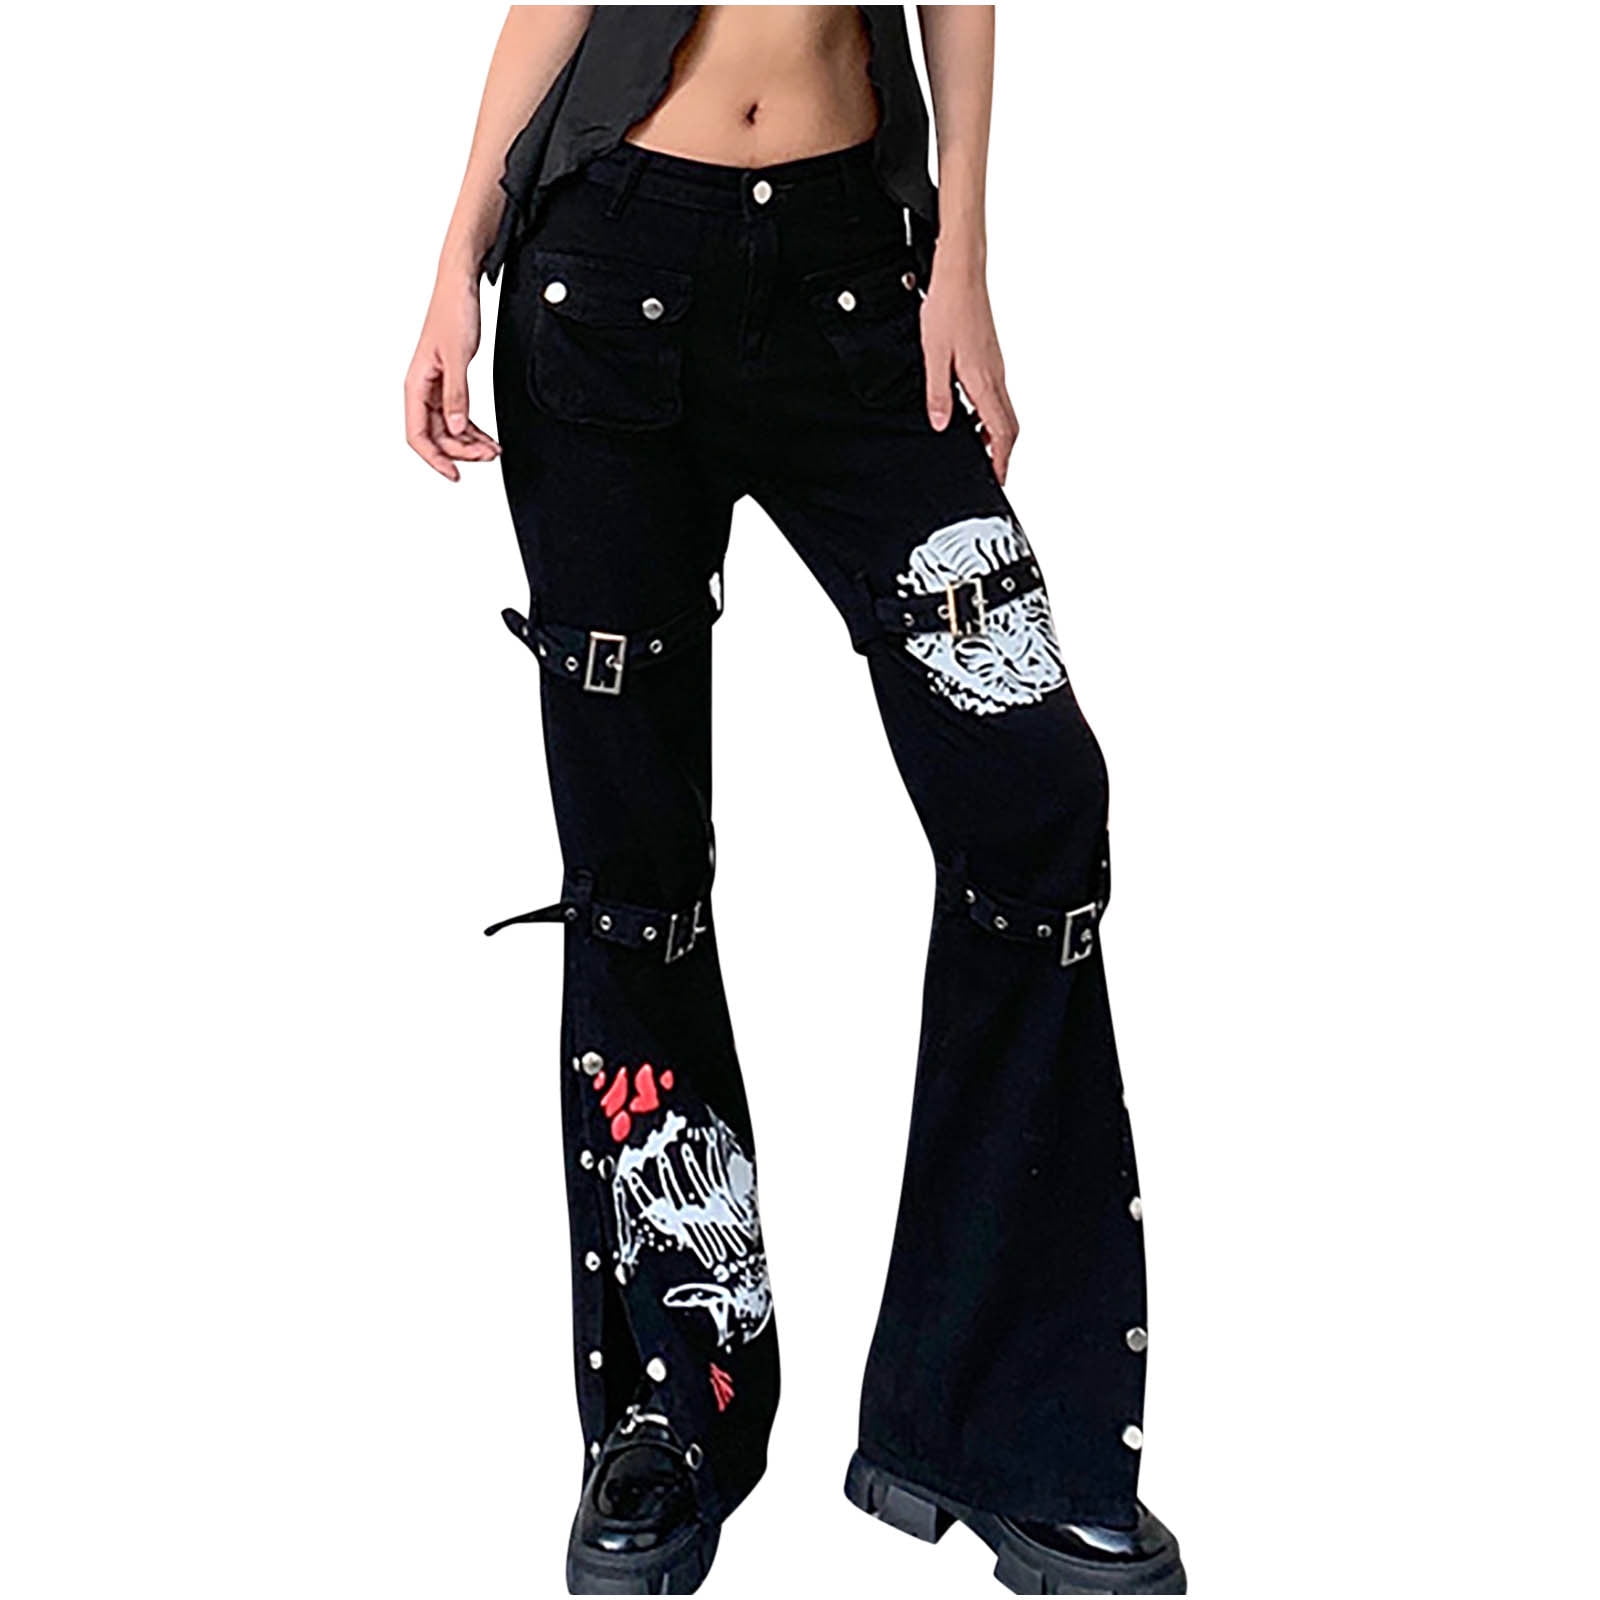 Fashion Girl Cargo Pants Women Punk Pockets Jogger Trousers With Chain 2022  Hot Pants